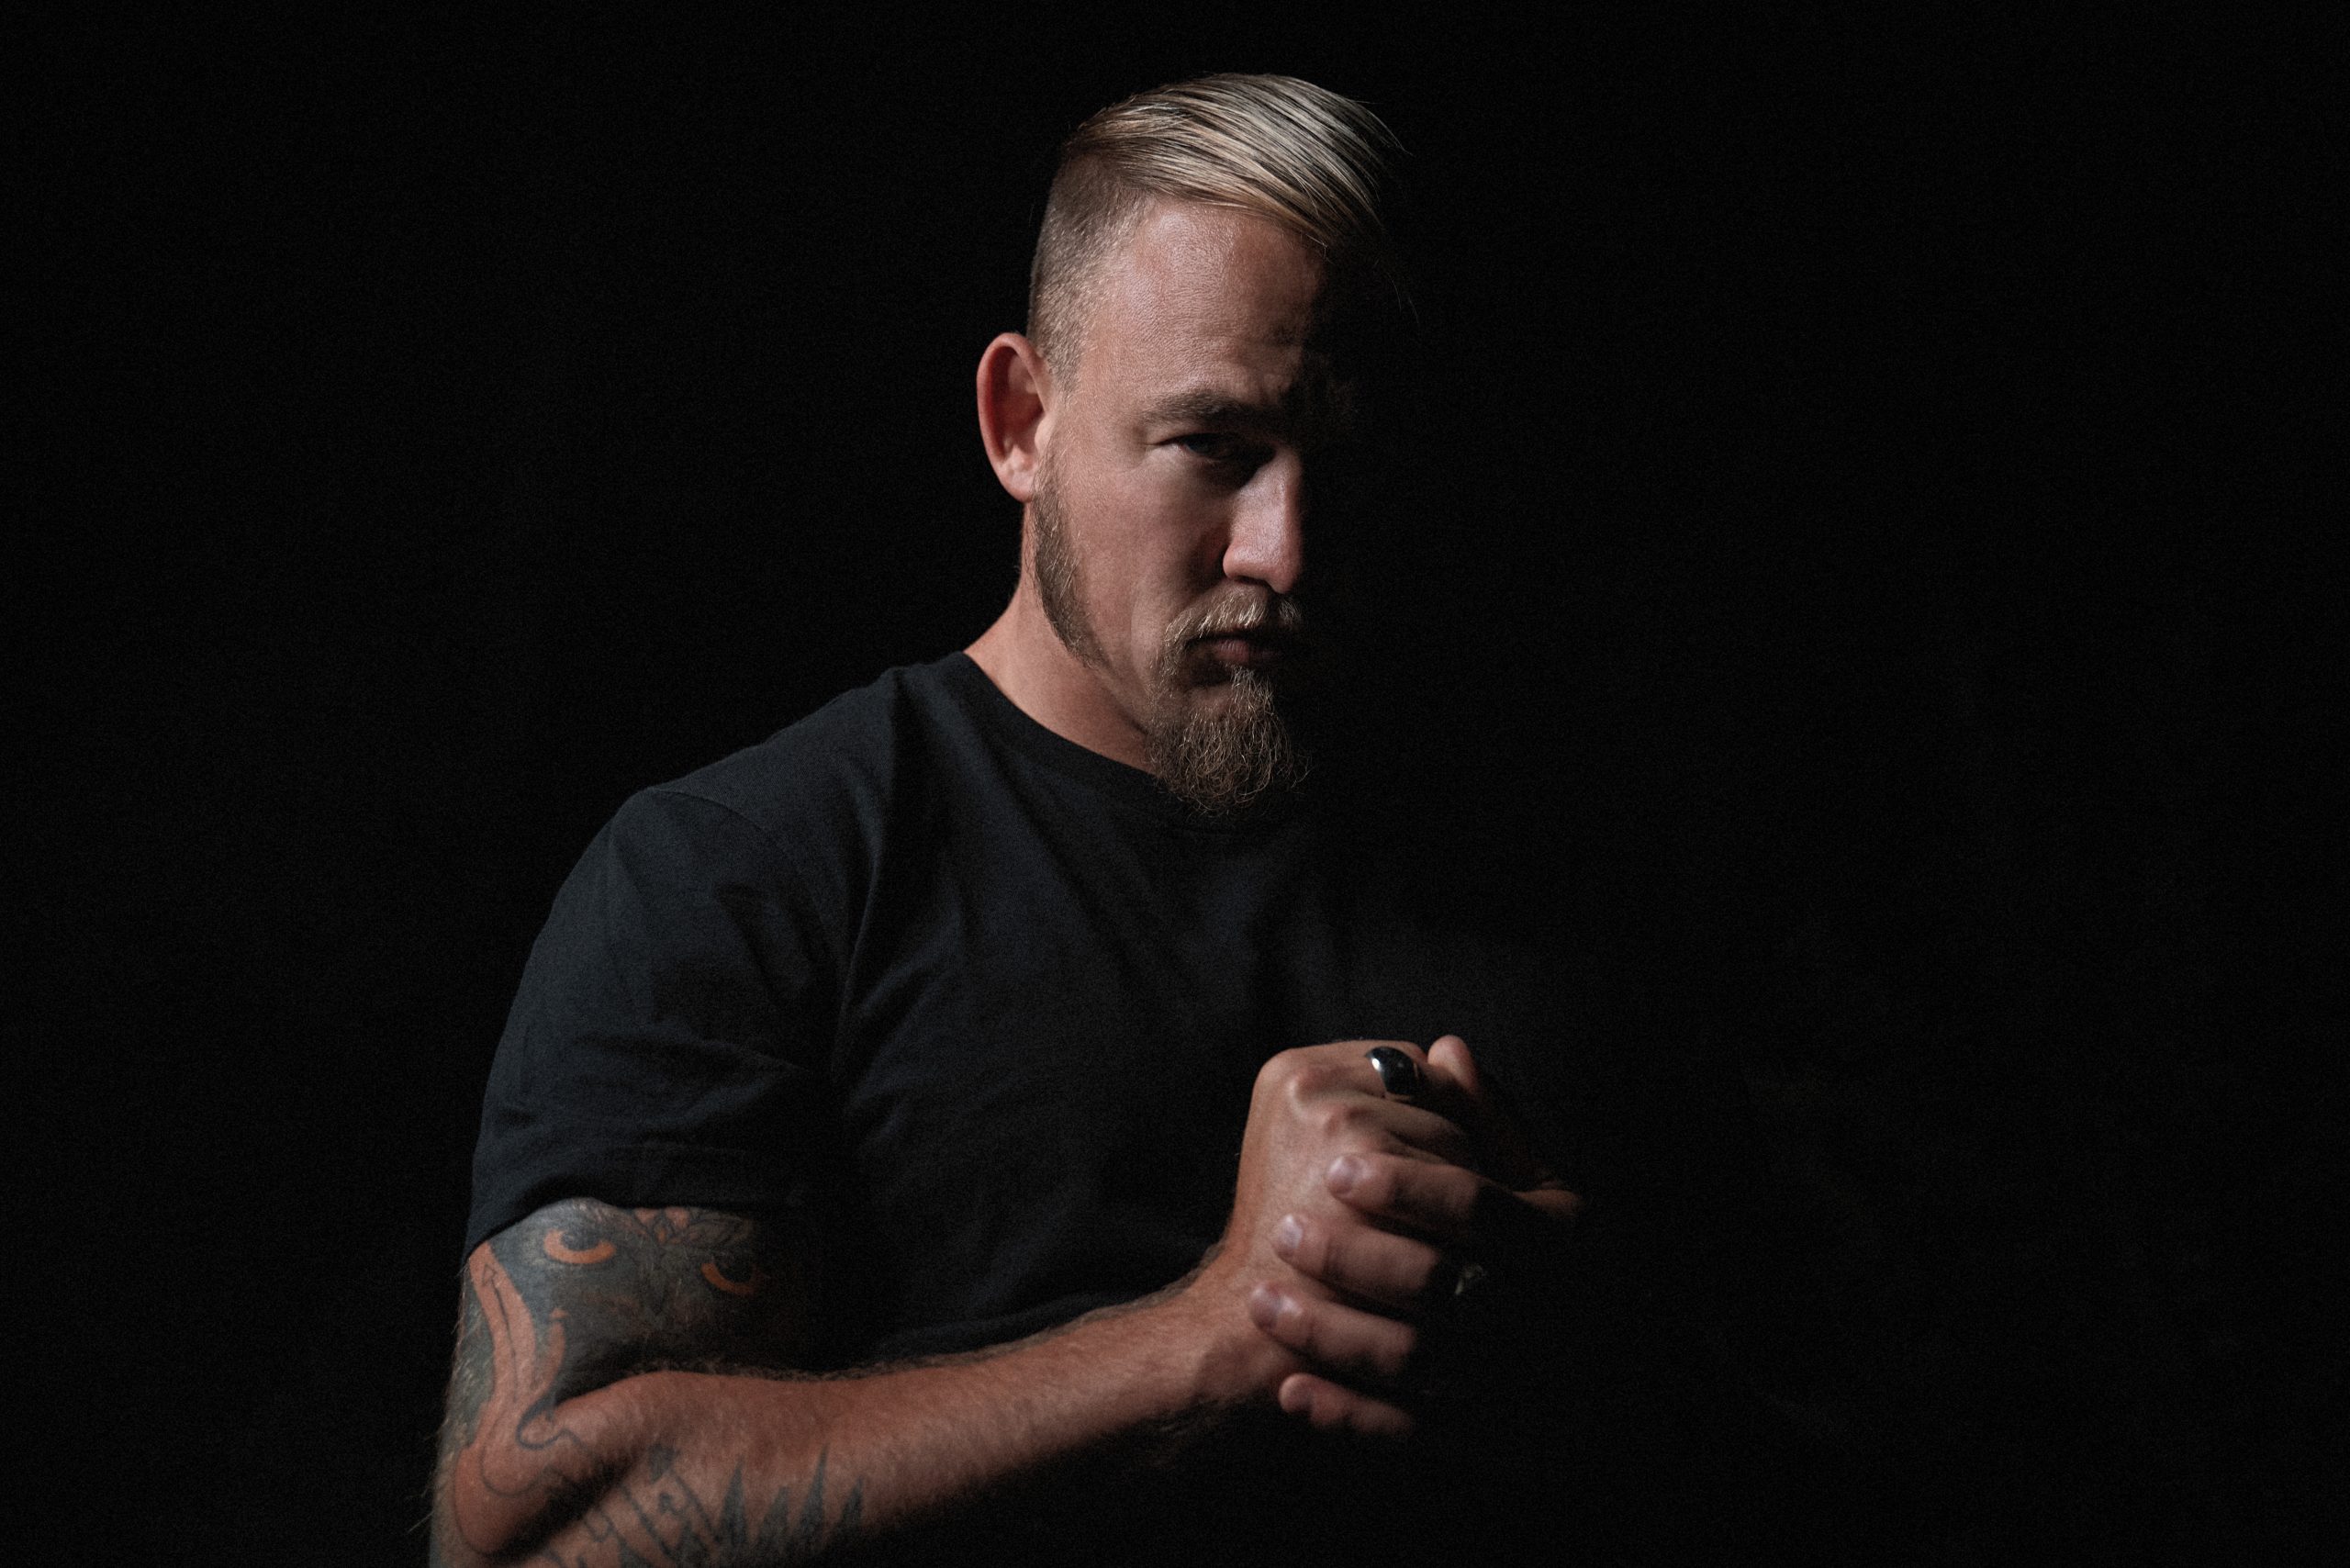 Shaping our present when we open our hearts, ‘Protected’ is the new single from genre-bending conscious hip-hop artist SOULEYE Feat South African vocalist ‘Esjay Jones’.